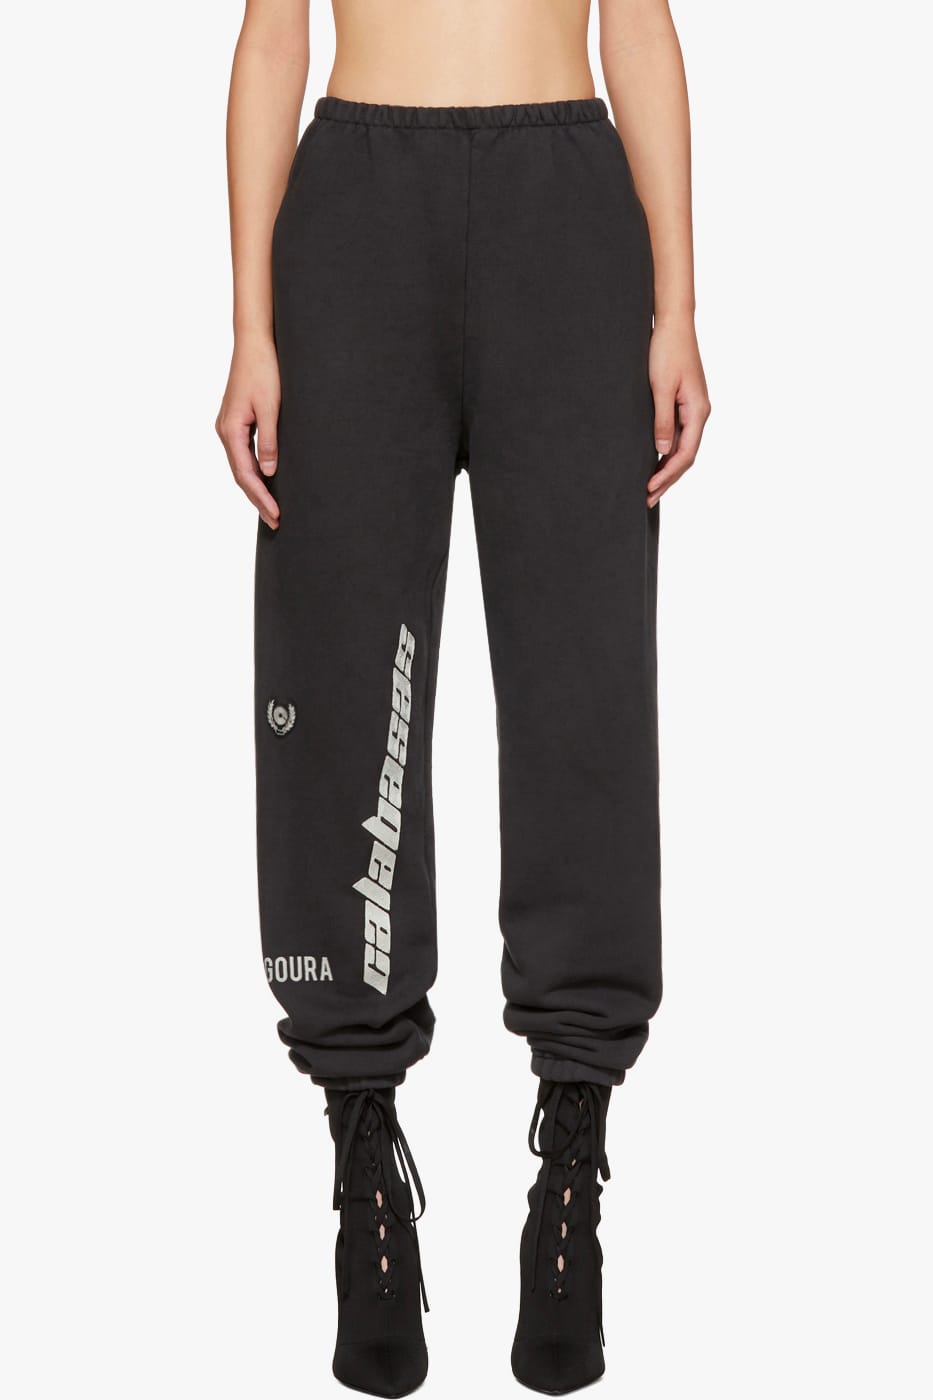 yeezy french terry sweatpants